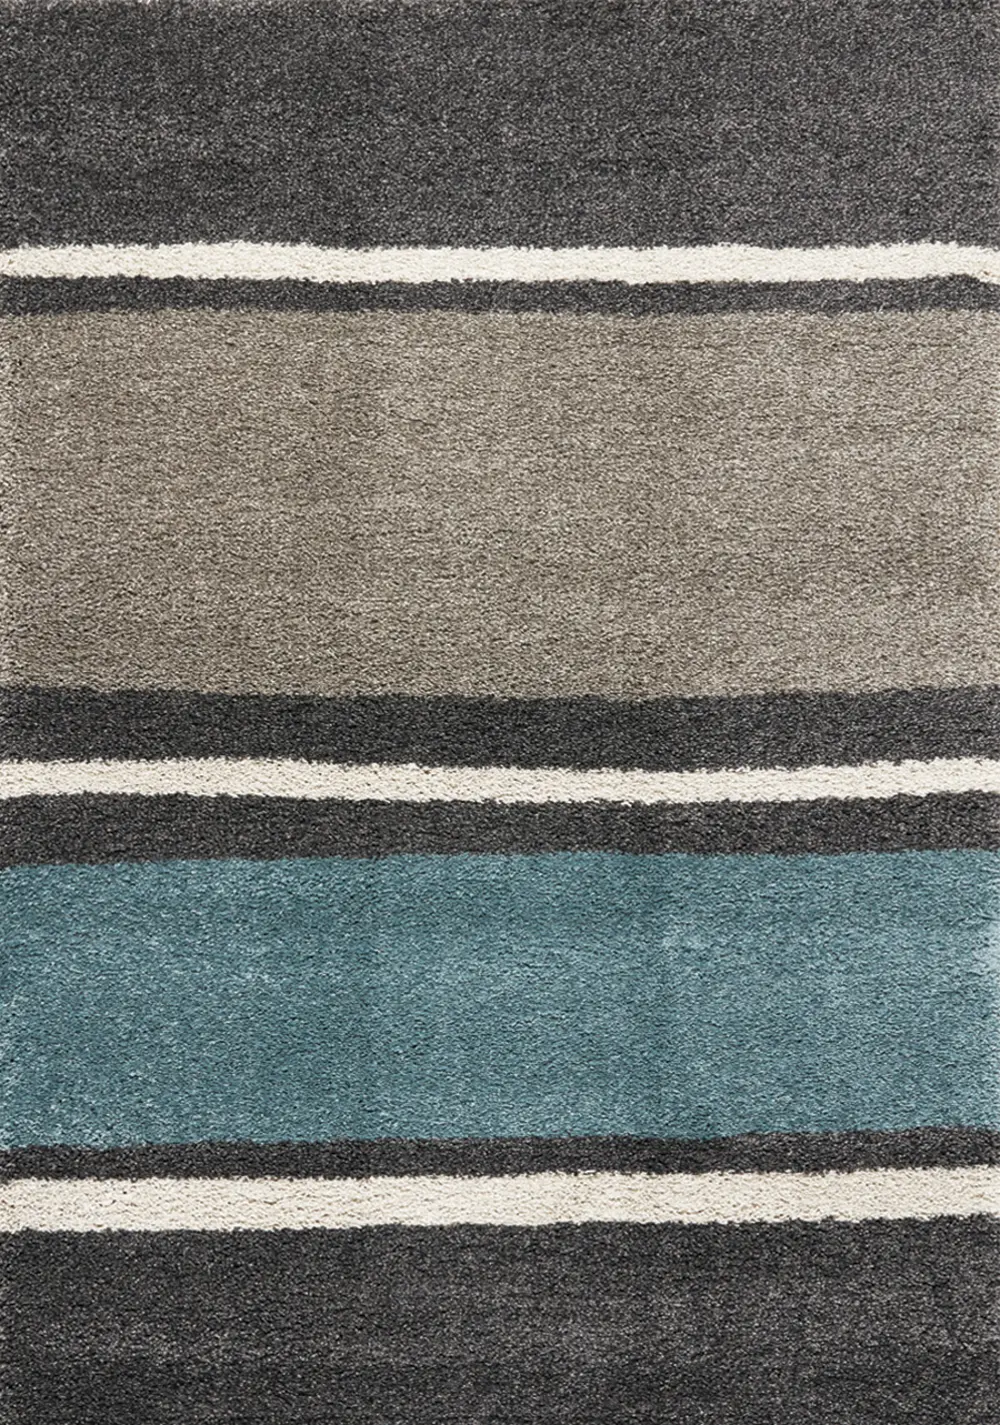 8 x 11 X-Large Striped Gray, Taupe and Teal Blue Rug - Maroq-1